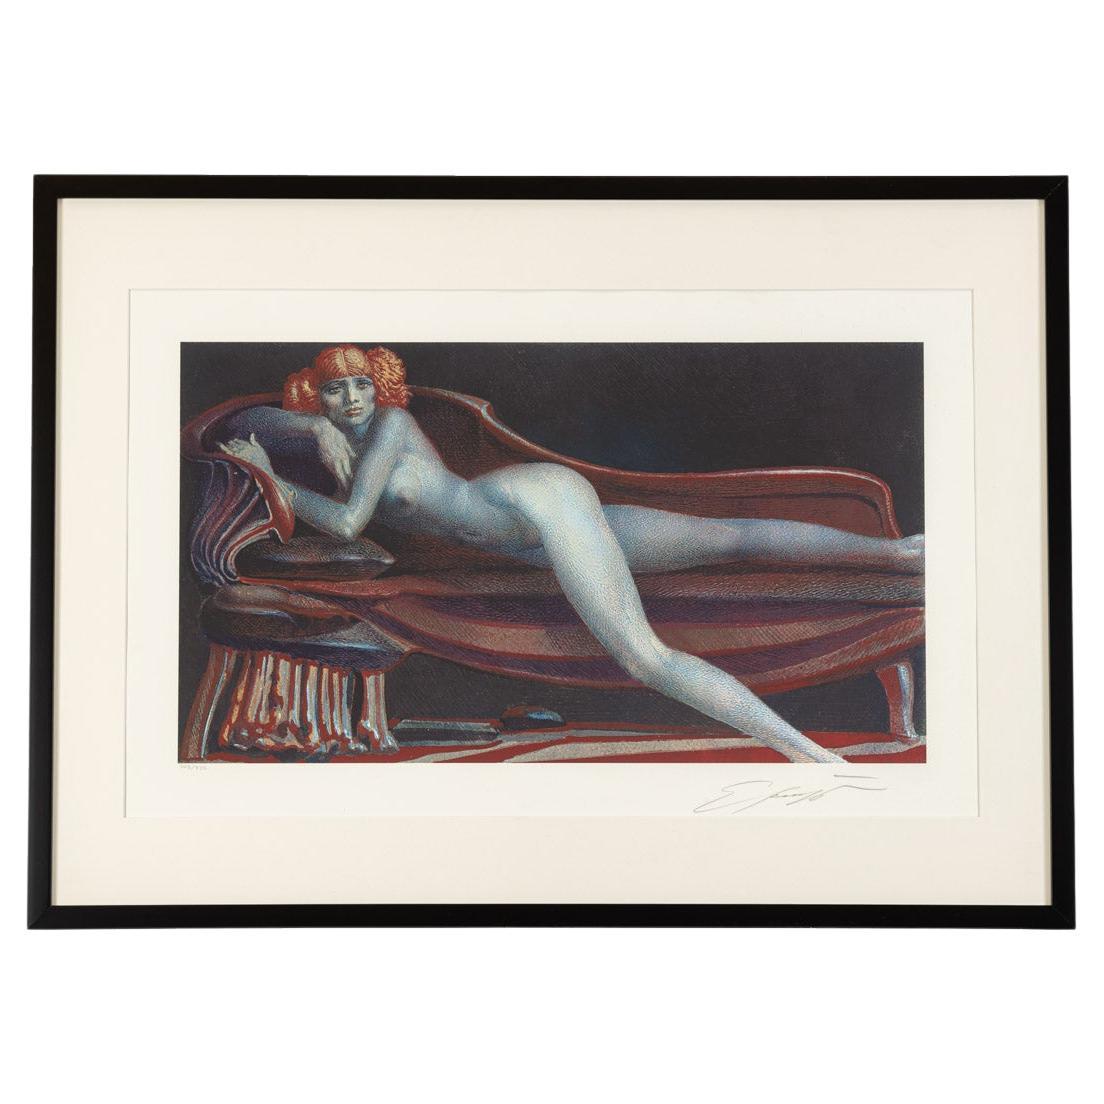 Woman on Chaiselongue Nude Color Lithograph Framed Erotic Ernst Fuchs signed